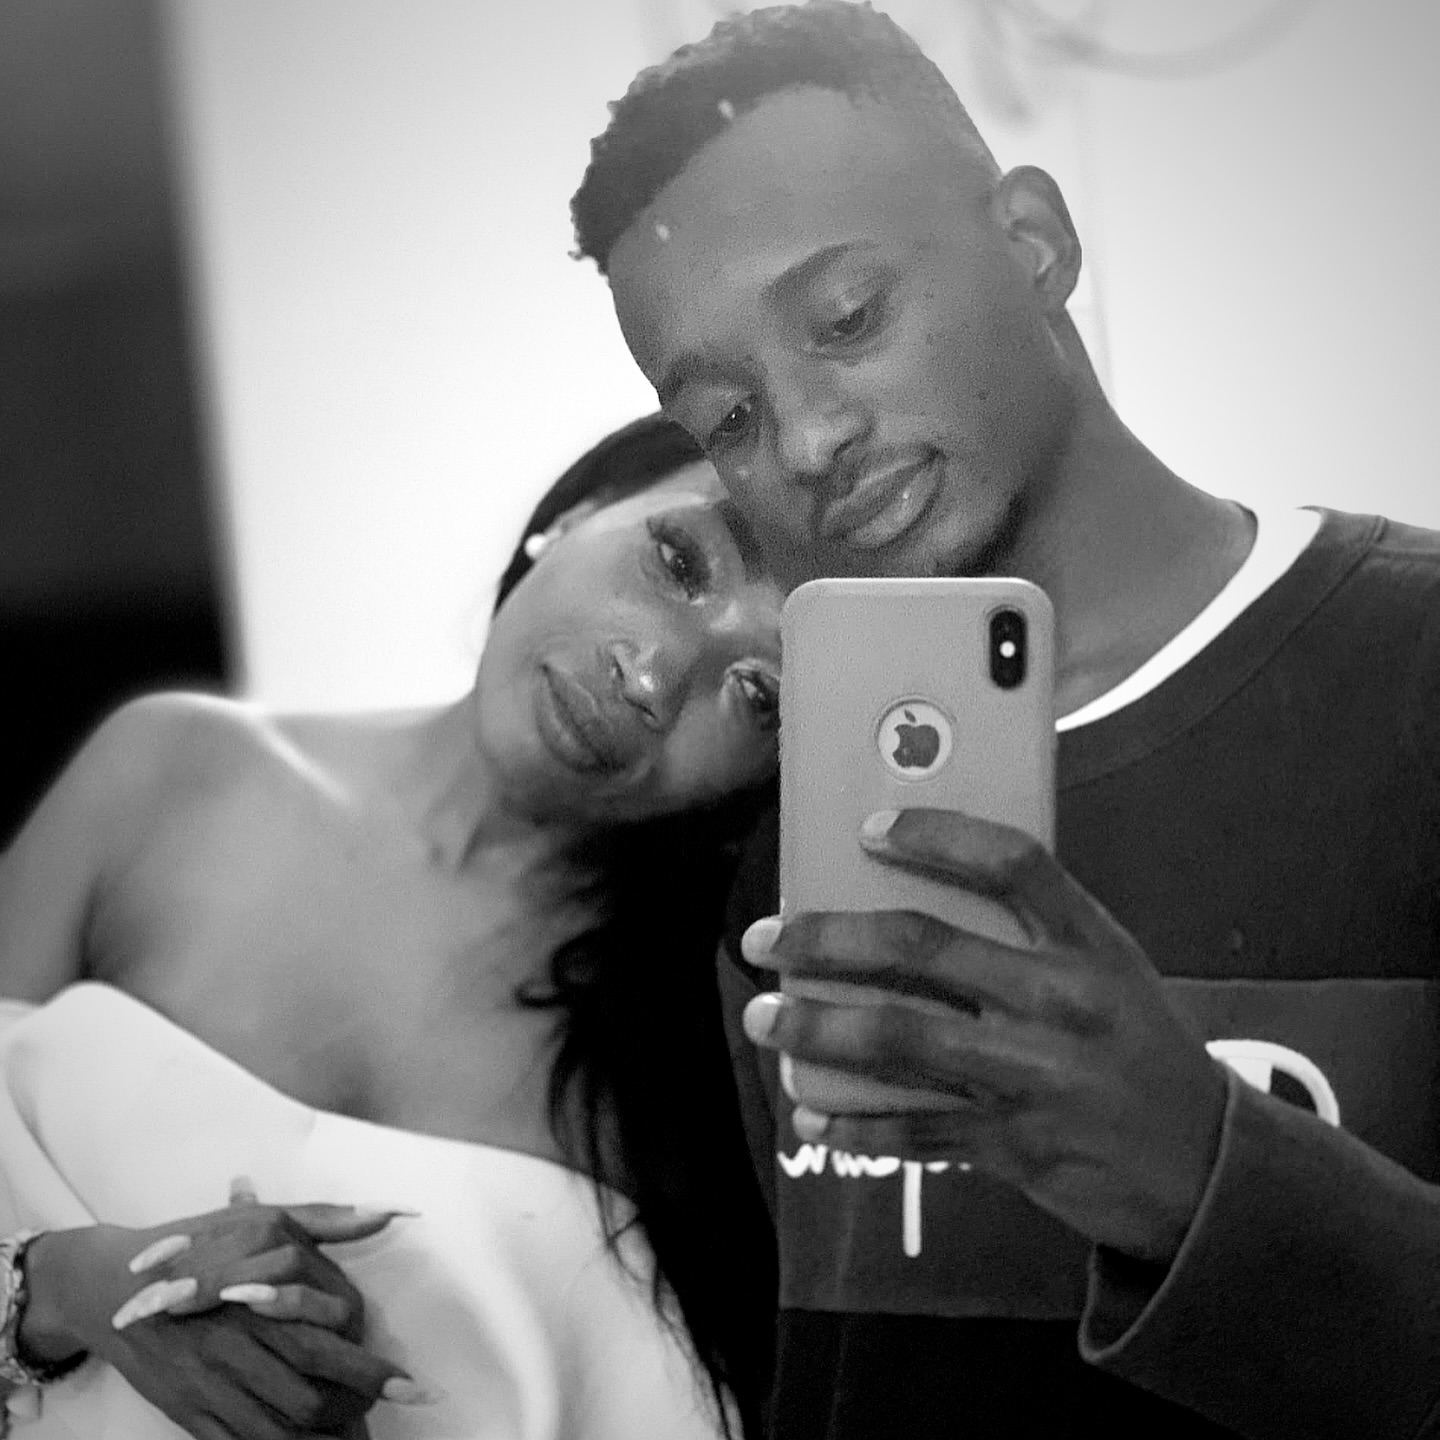 Actress Sophie Ndaba's son pens sweetest birthday message to her